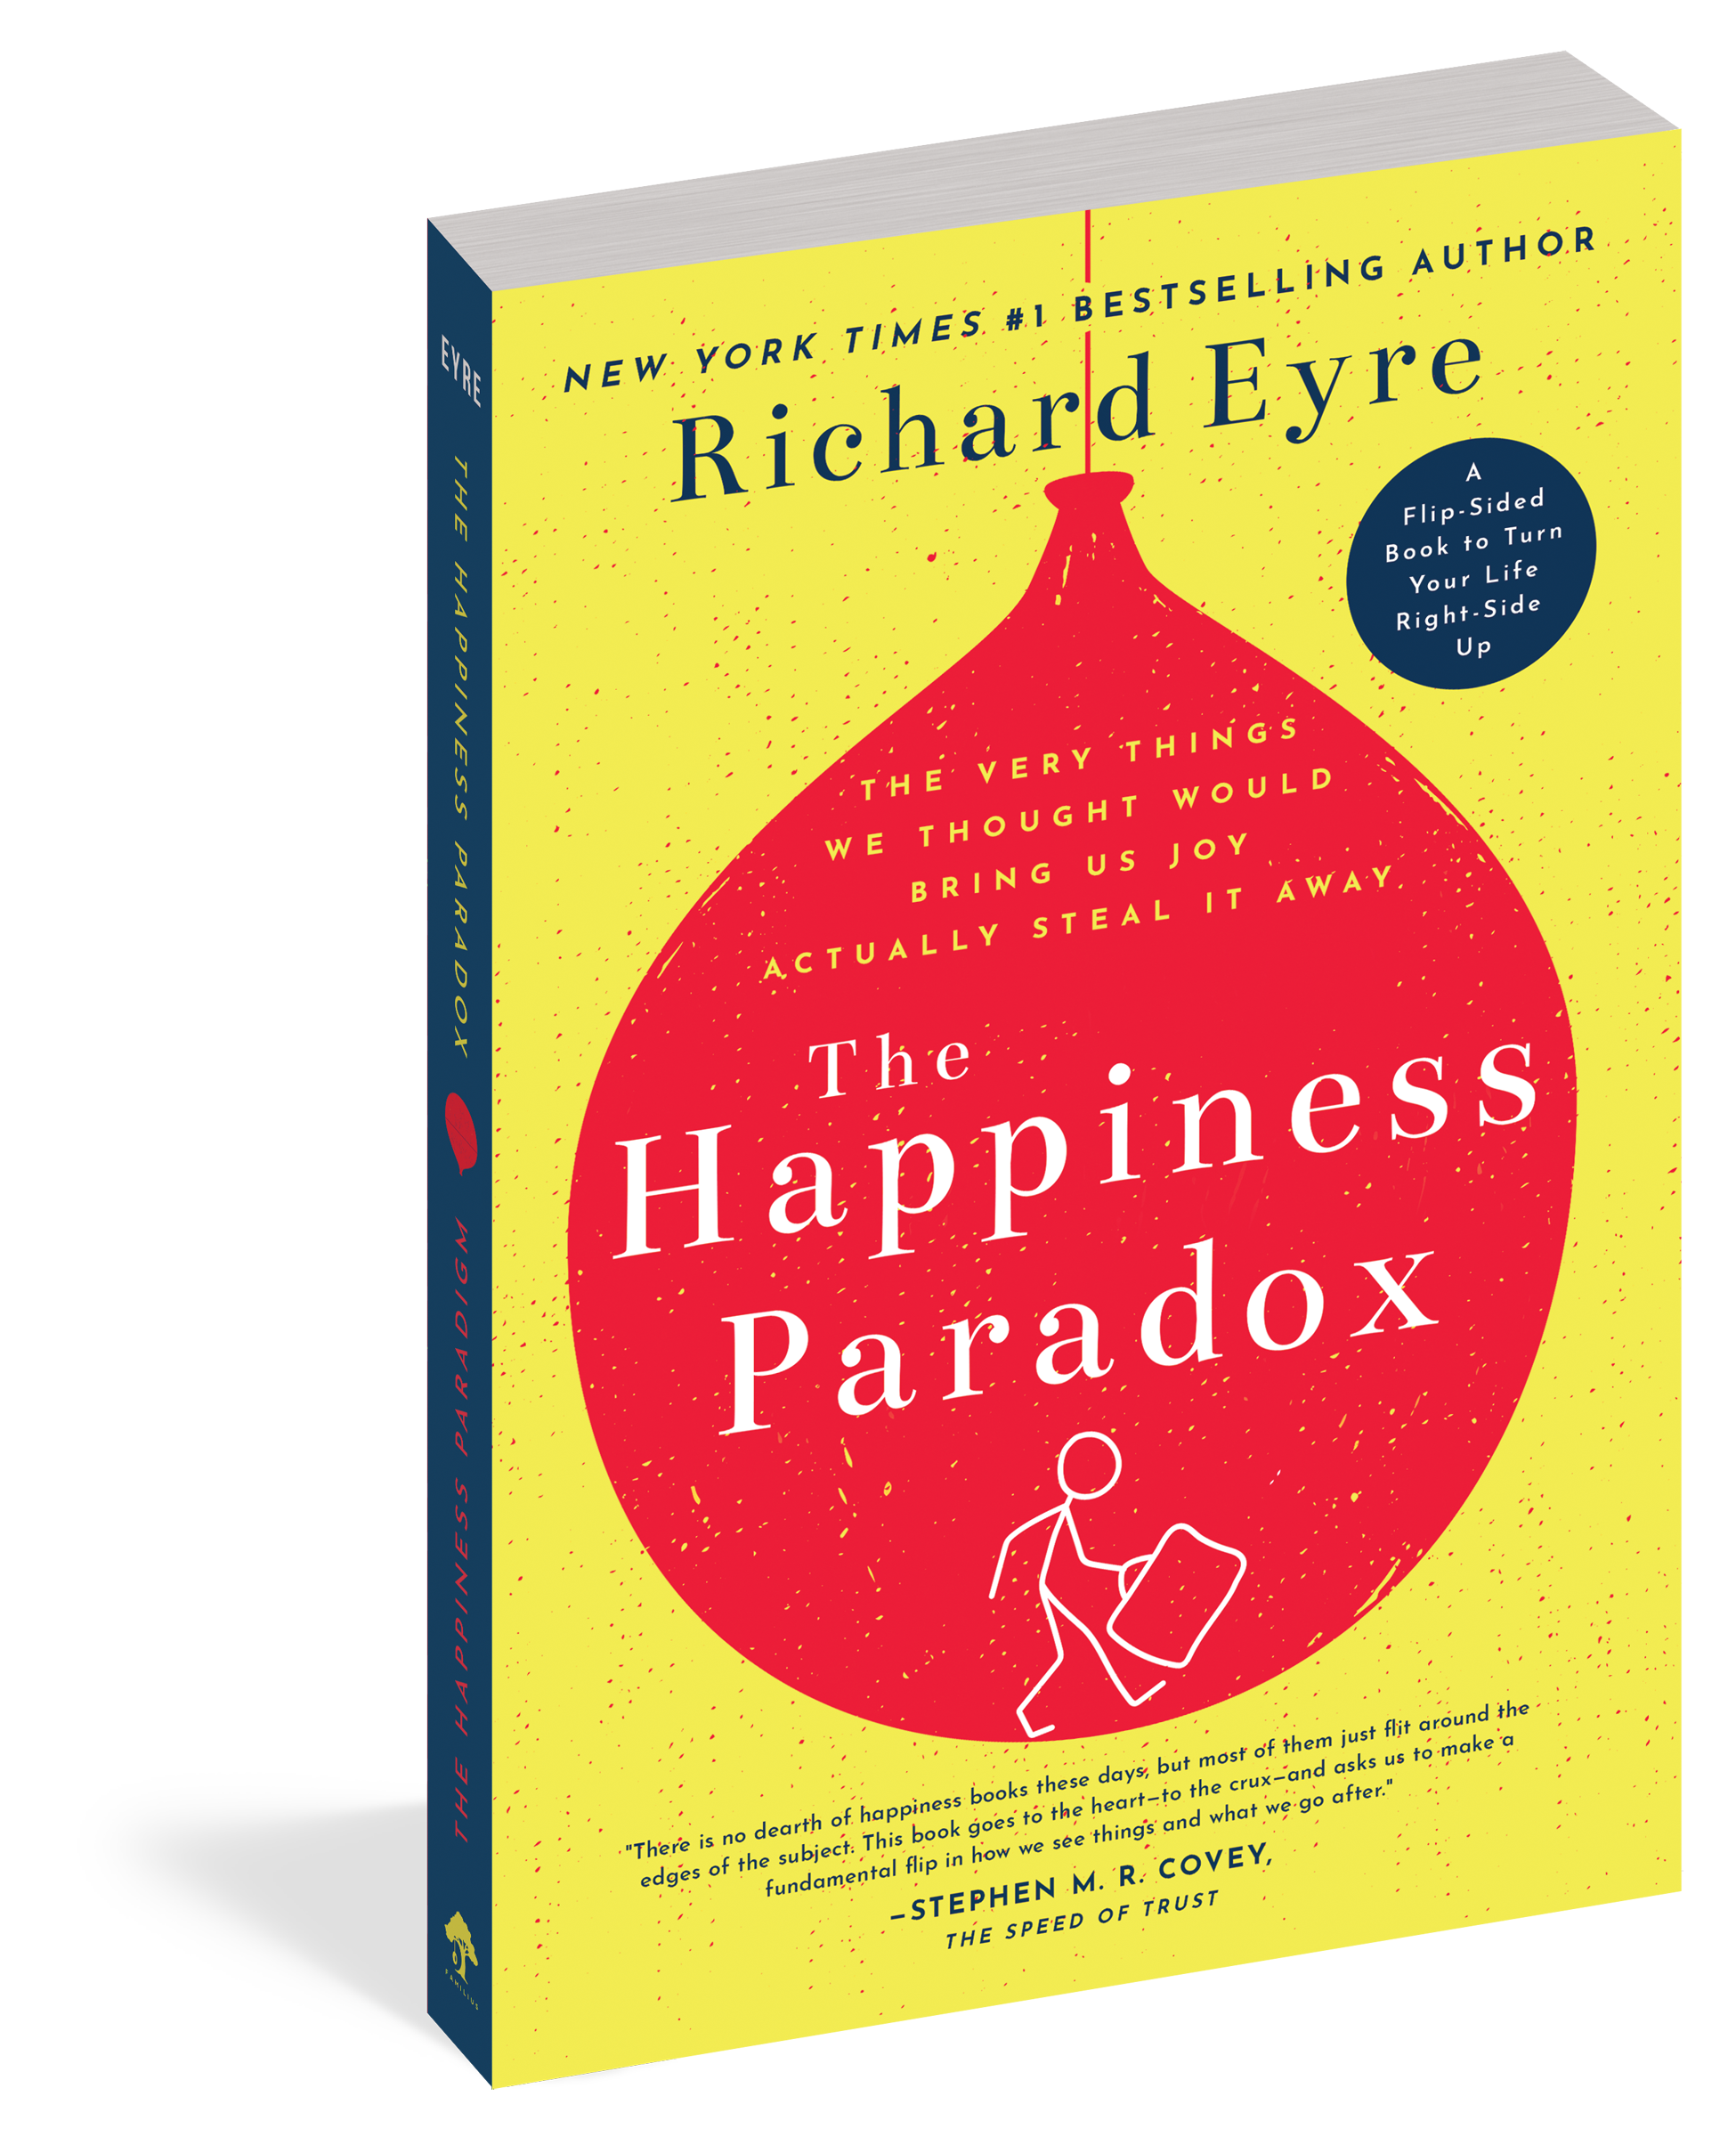 The cover of the book The Happiness Paradox.